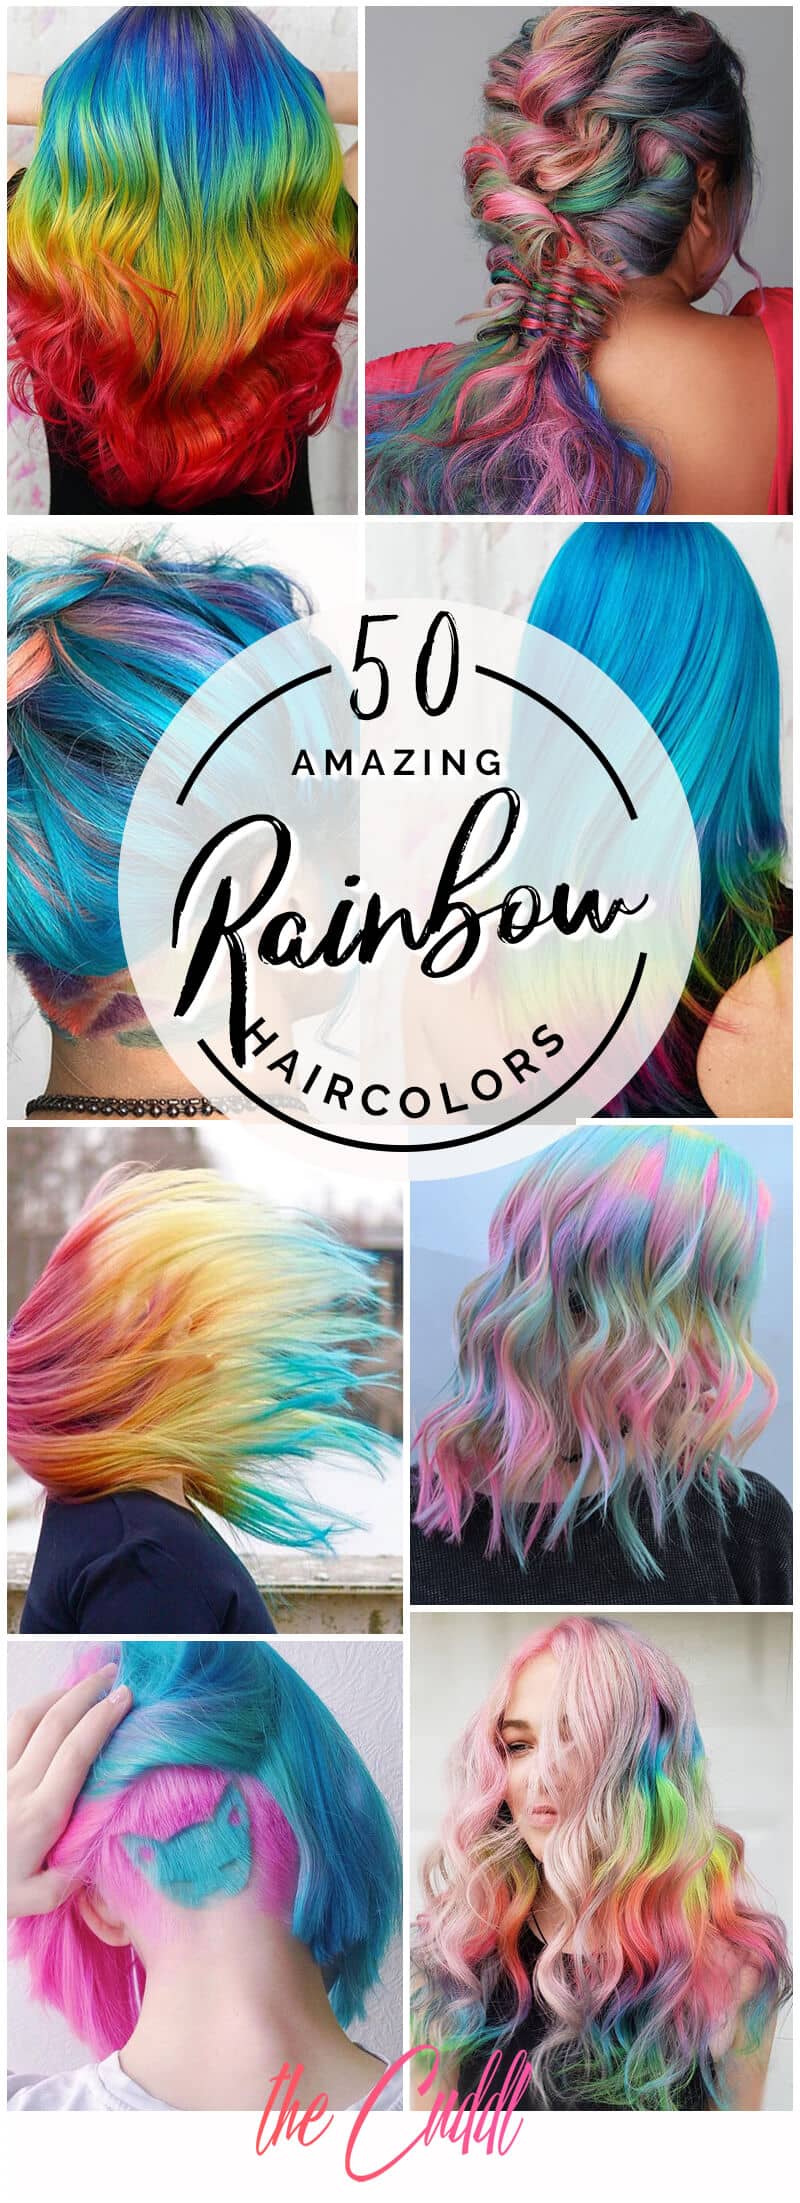 50 Stunning Rainbow Hair Color Styles Trending Now